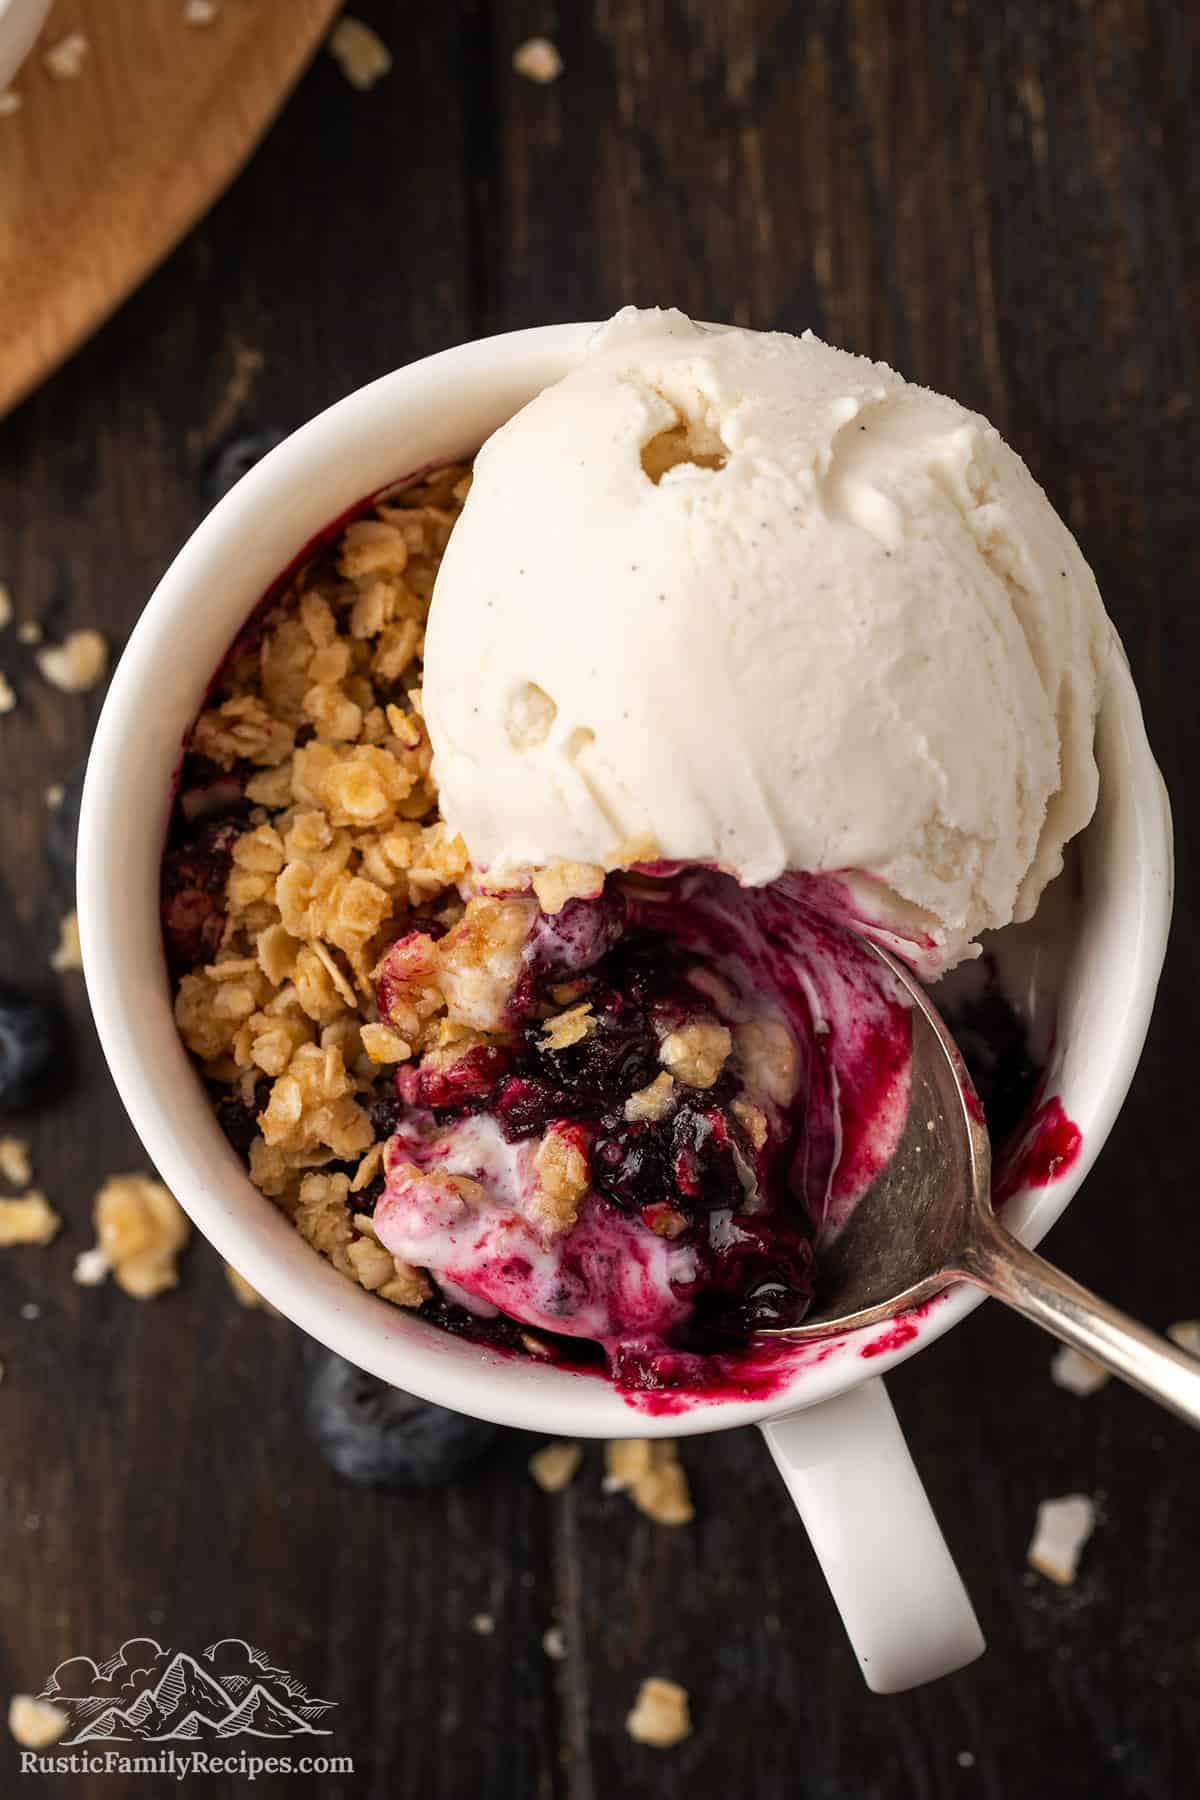 Top view of a blueberry crisp in a mug with ice cream